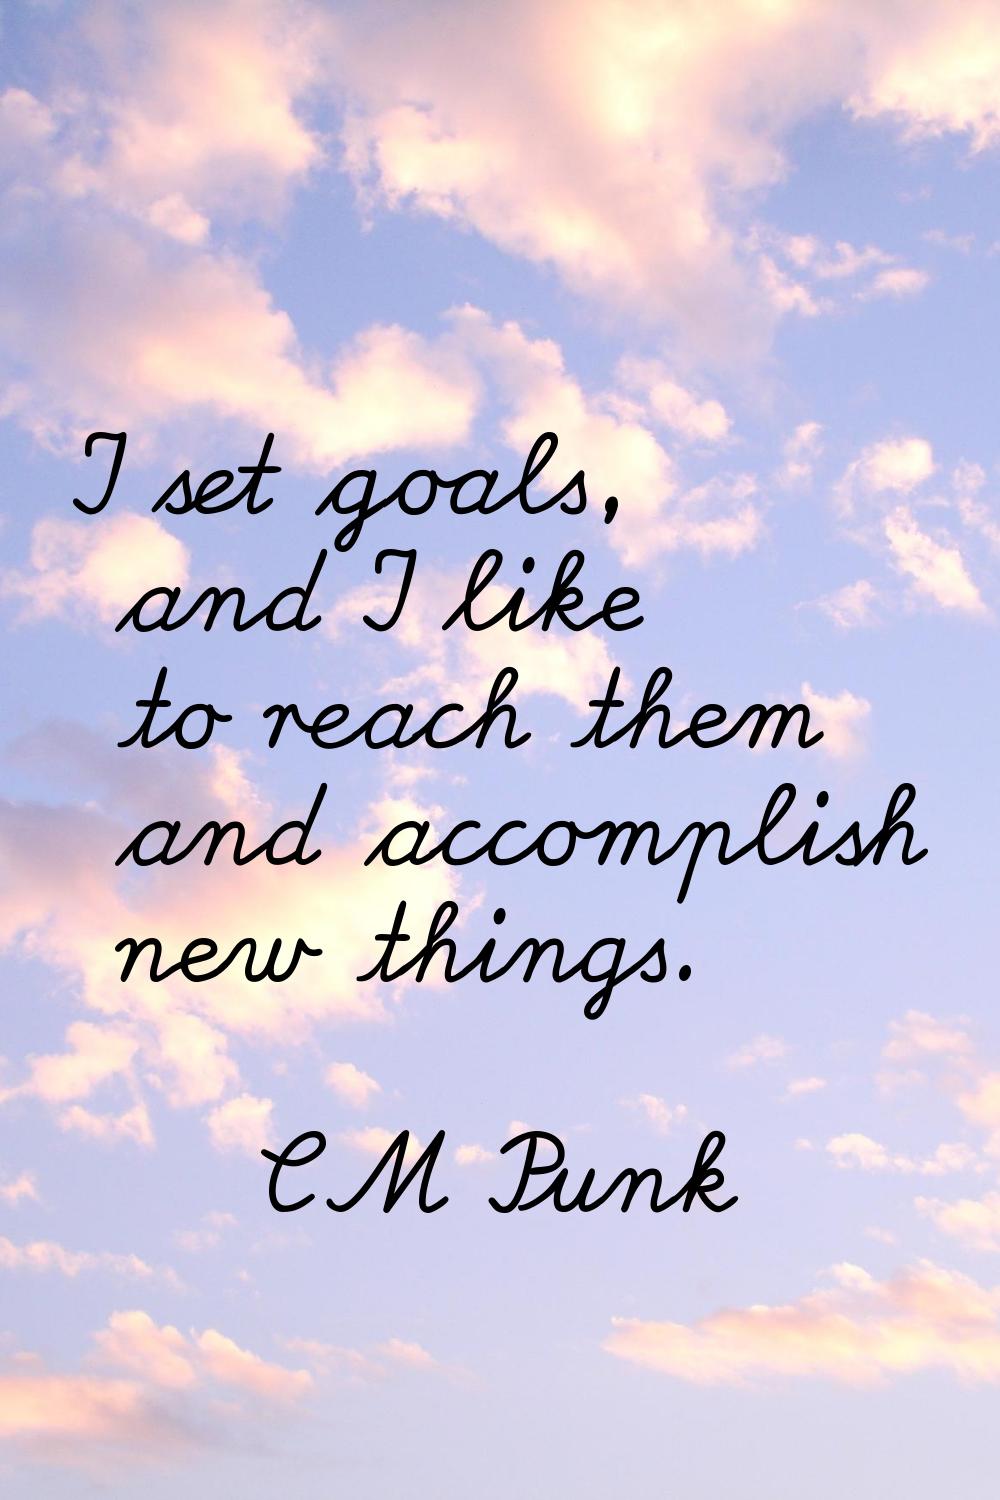 I set goals, and I like to reach them and accomplish new things.